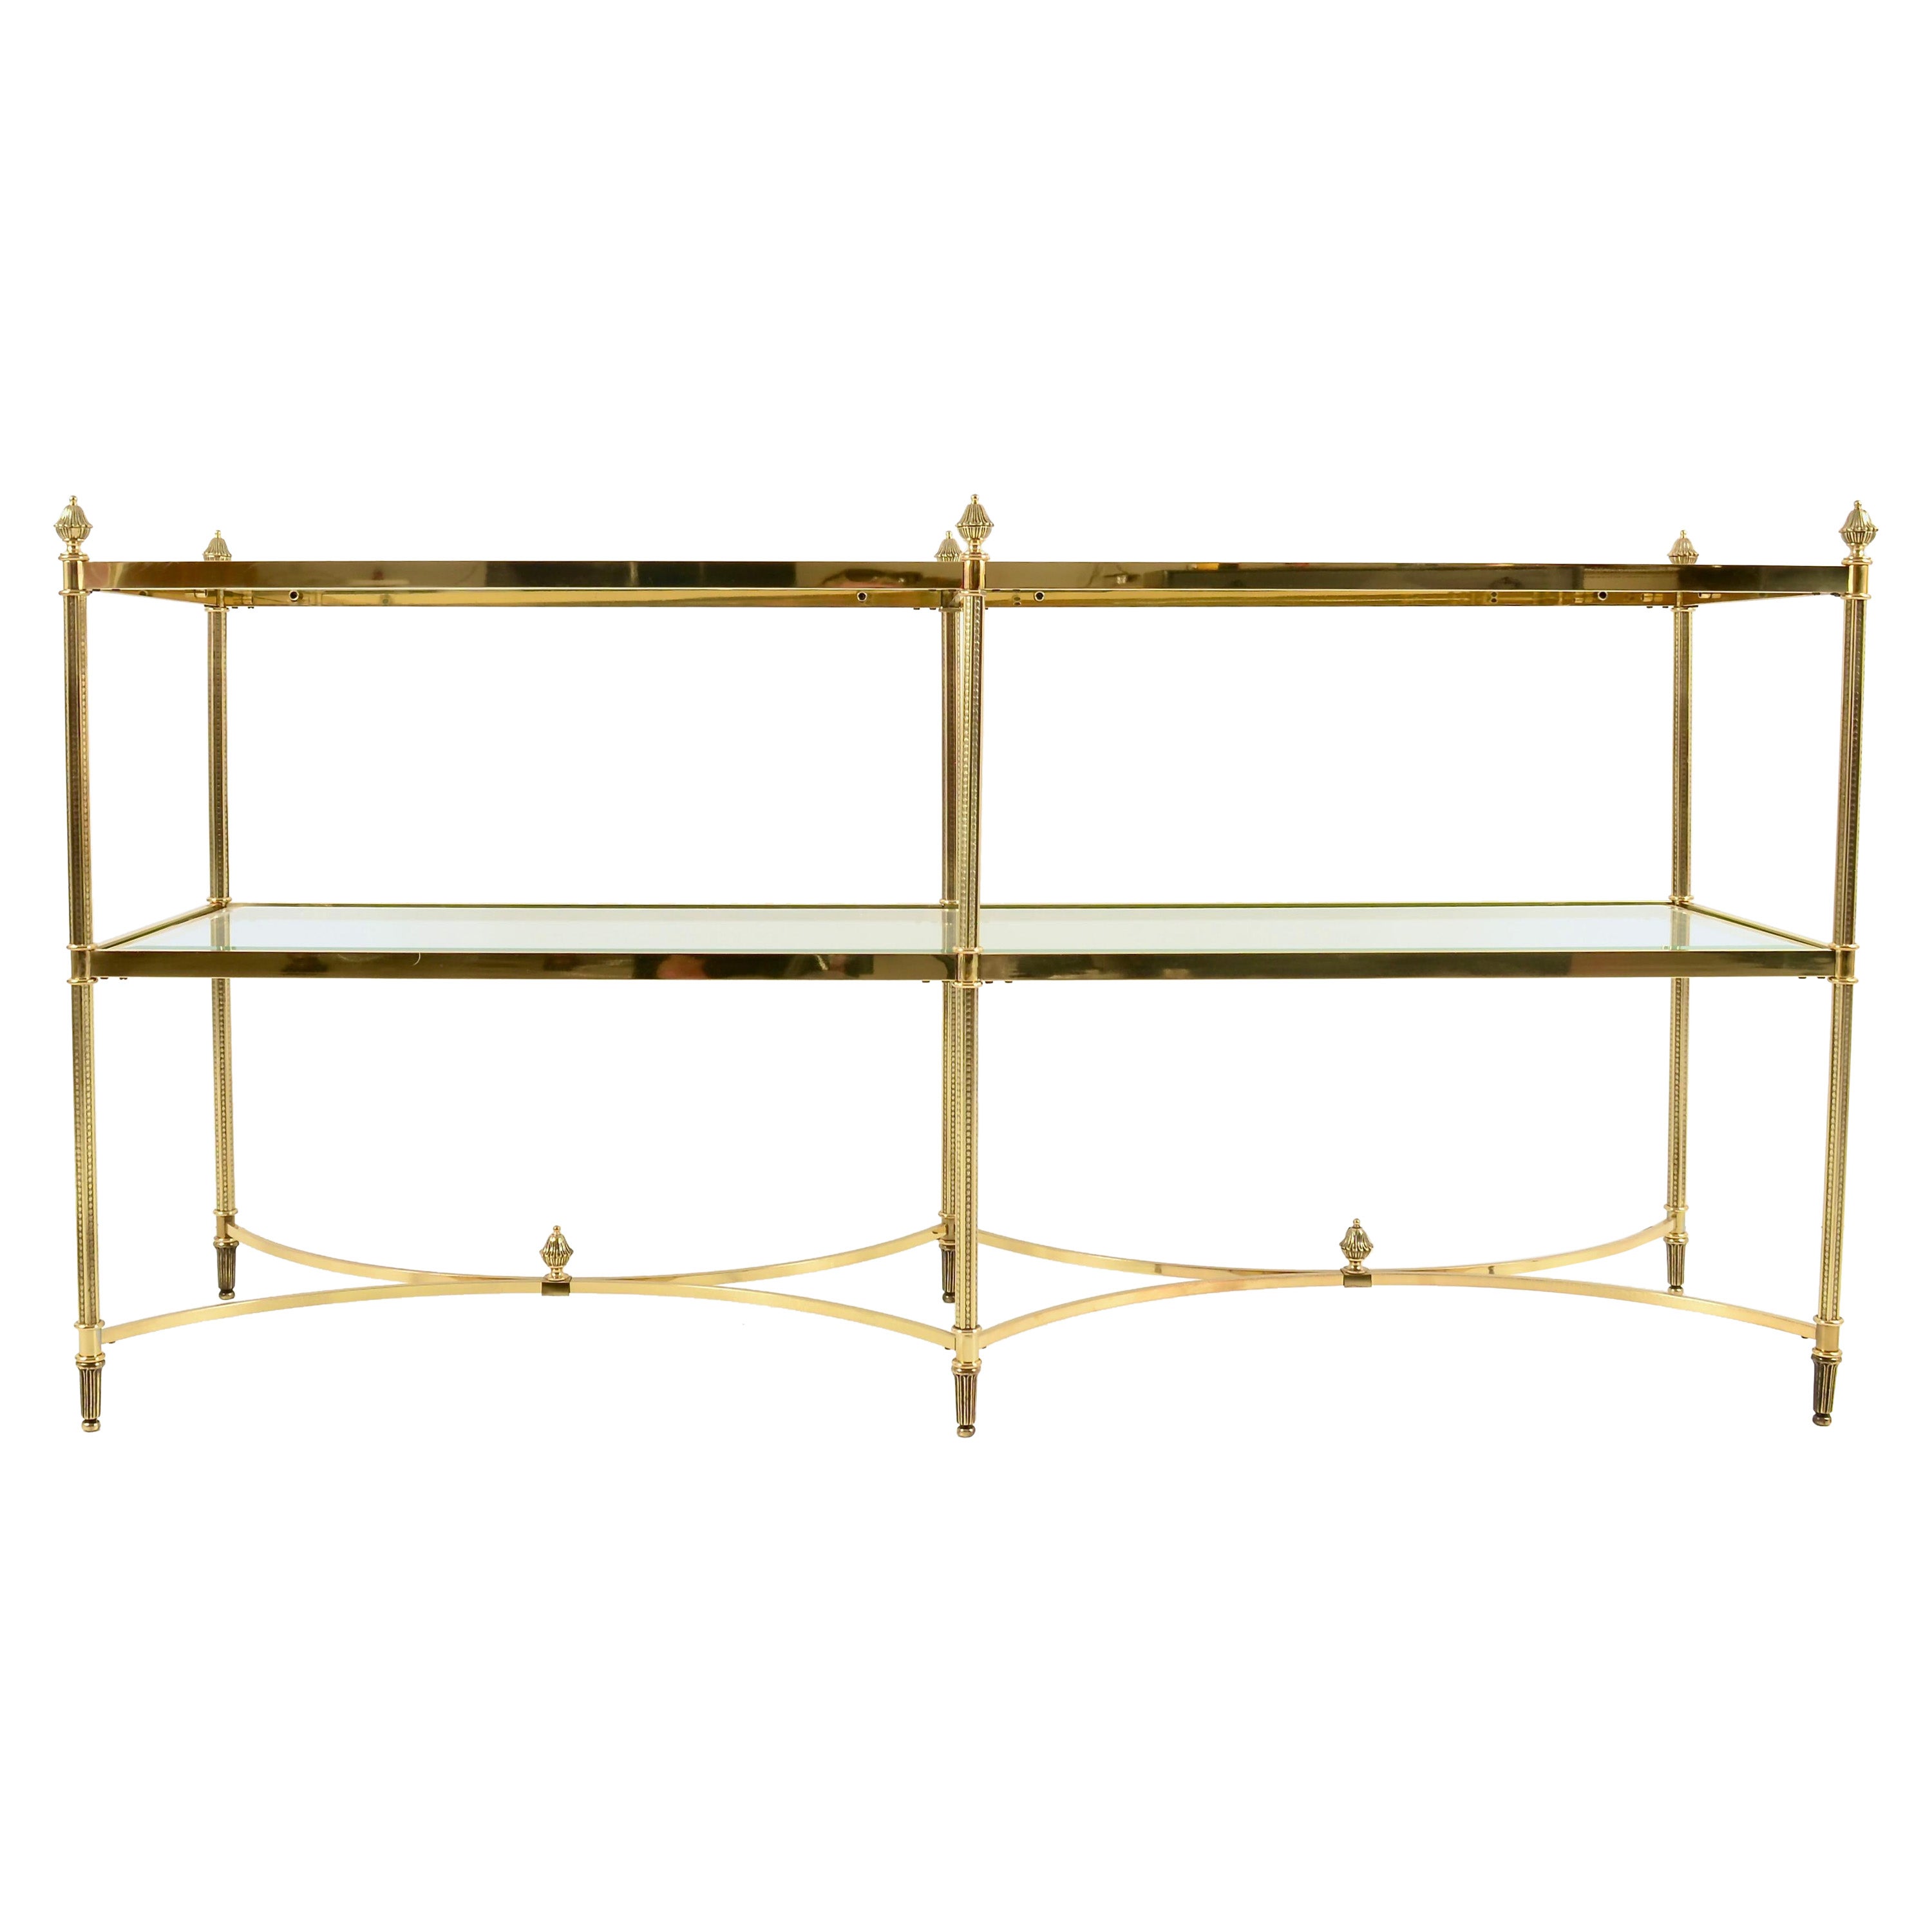 Neo-classical Form Sofa Table in Polished Brass w/ Beveled Glass Shelves